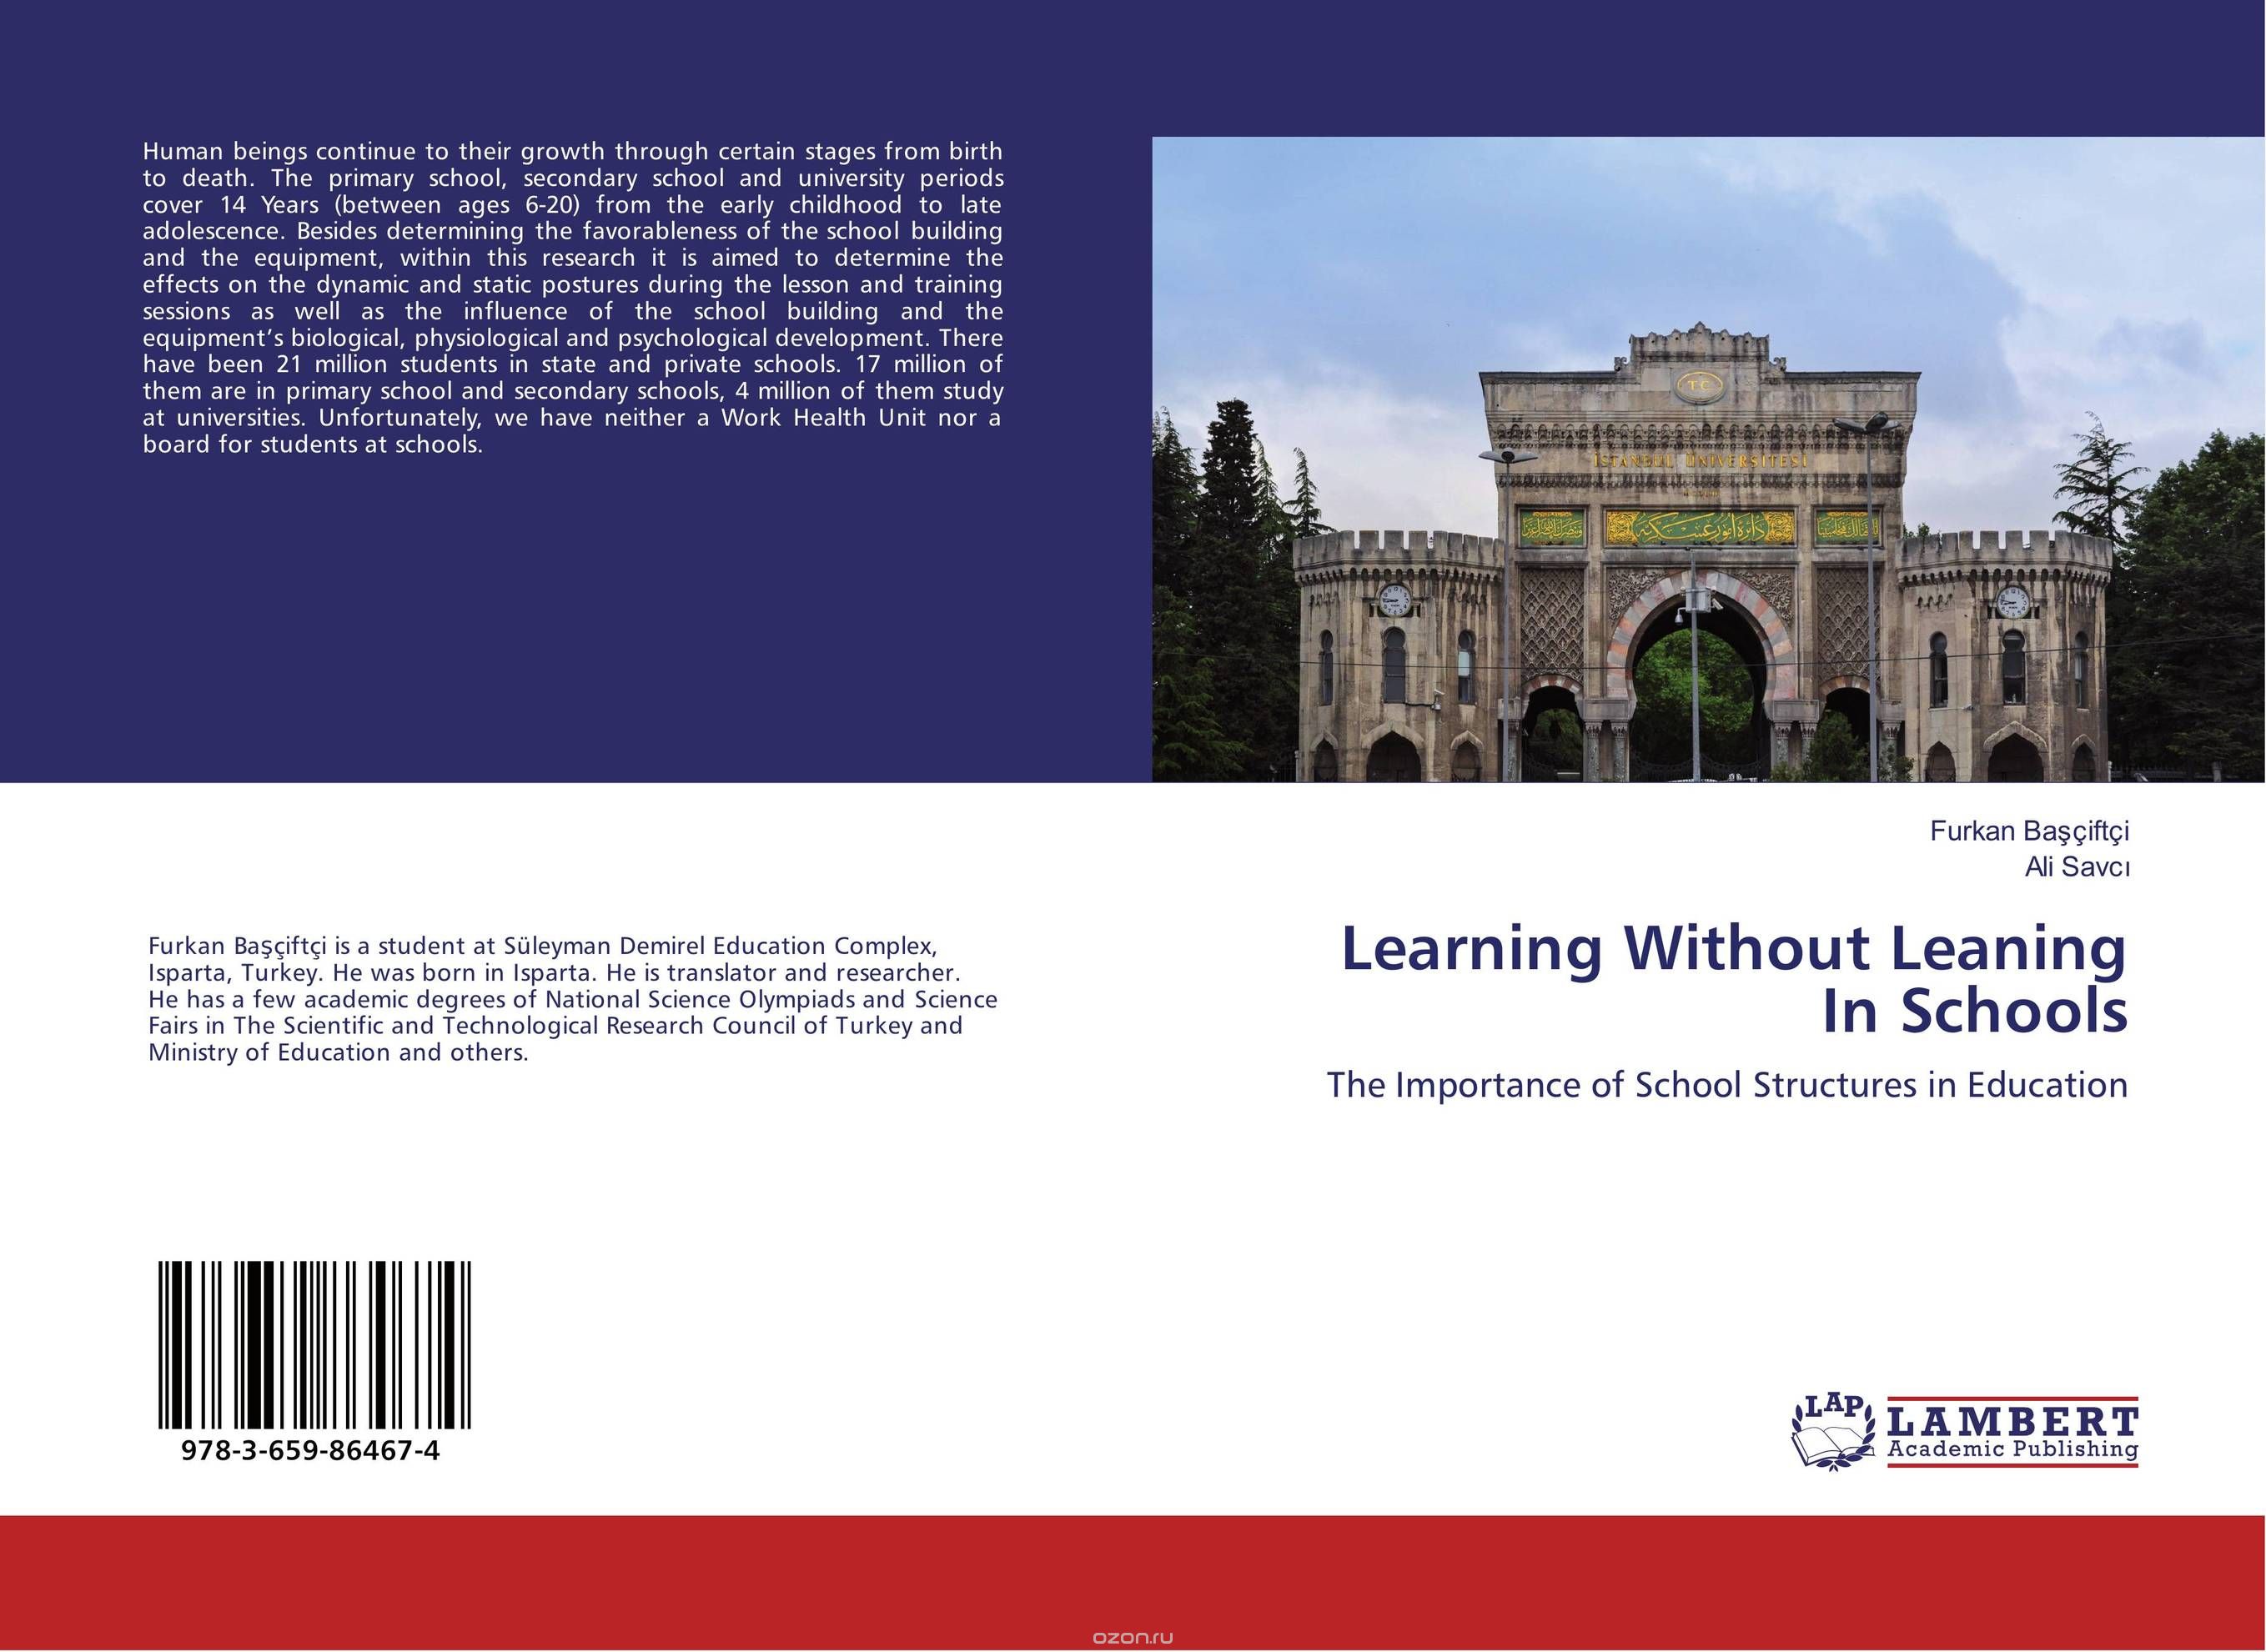 Скачать книгу "Learning Without Leaning In Schools"